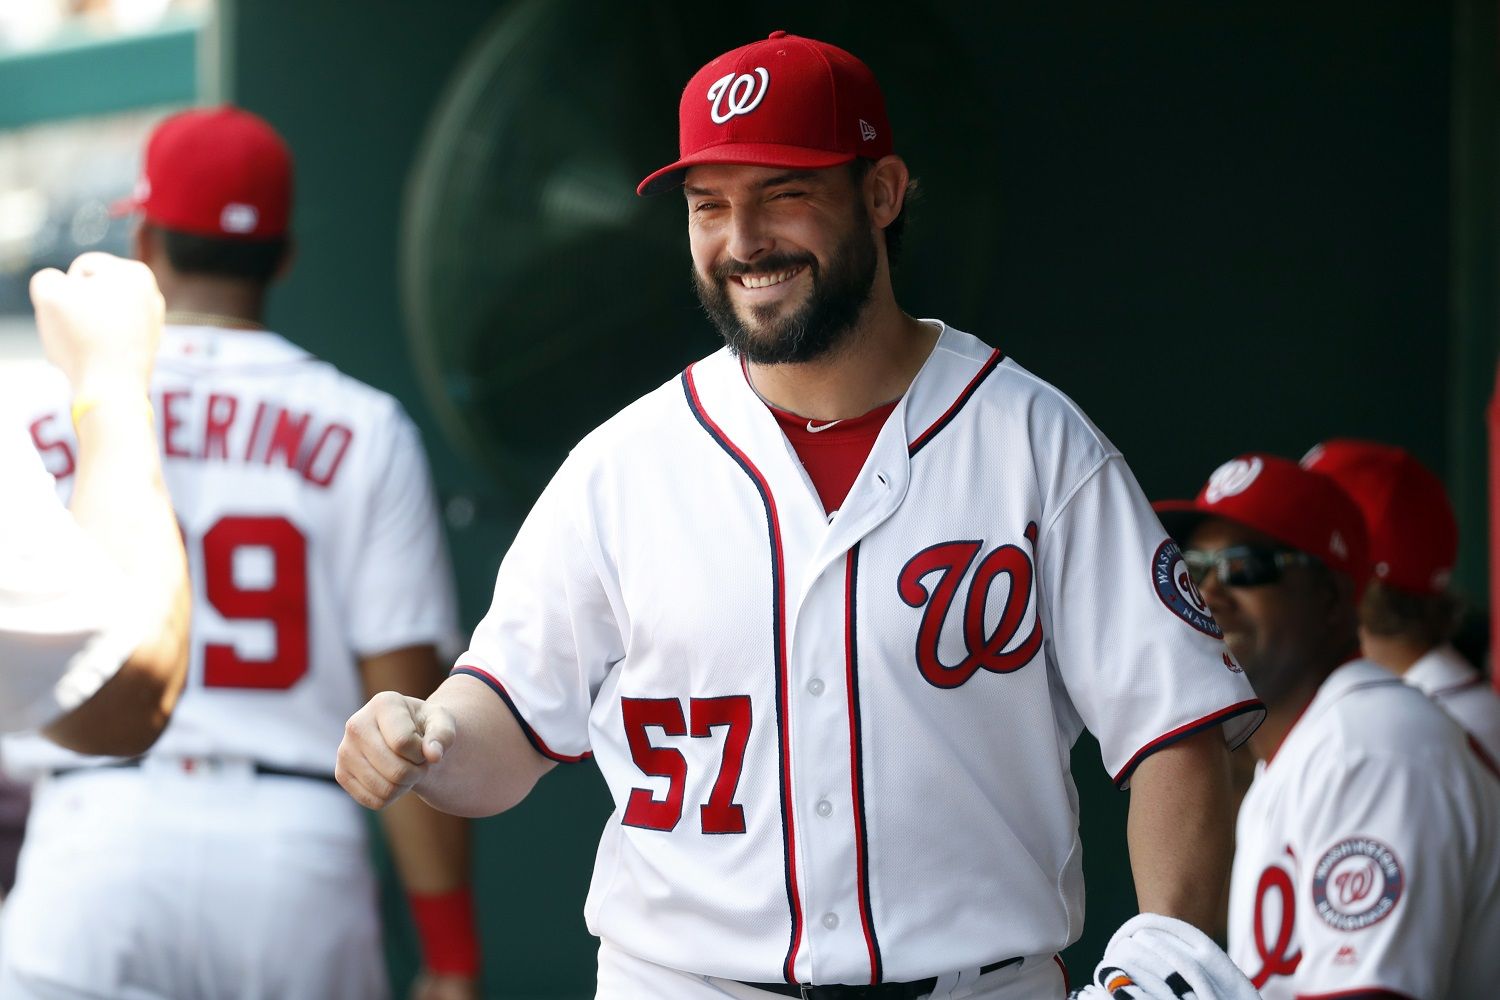 Washington Nationals starting pitcher Tanner Roark smiles in the dugout before an interleague baseball game against the Los Angeles Angels at Nationals Park Wednesday, Aug. 16, 2017, in Washington. (AP Photo/Alex Brandon)